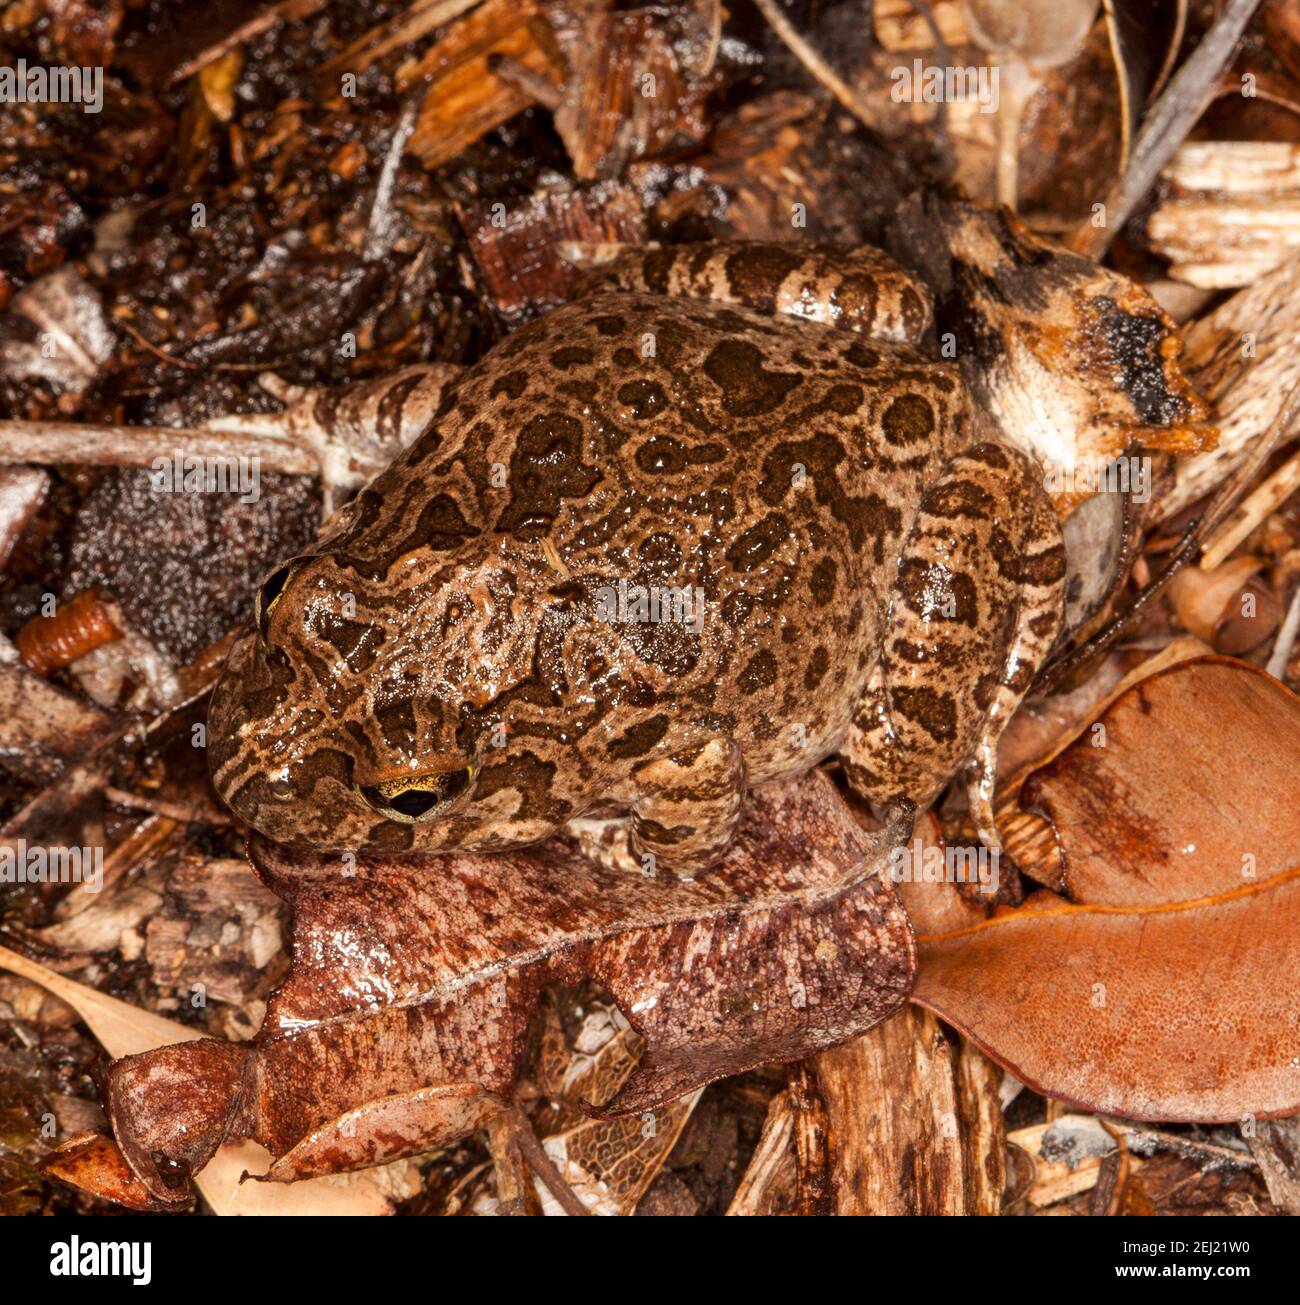 Brown Australian Ornate Burrowing Frog, Platyplectrum ornatum, perfectly camouflaged among dead leaves and bark in a garden bed in Queensland. Stock Photo